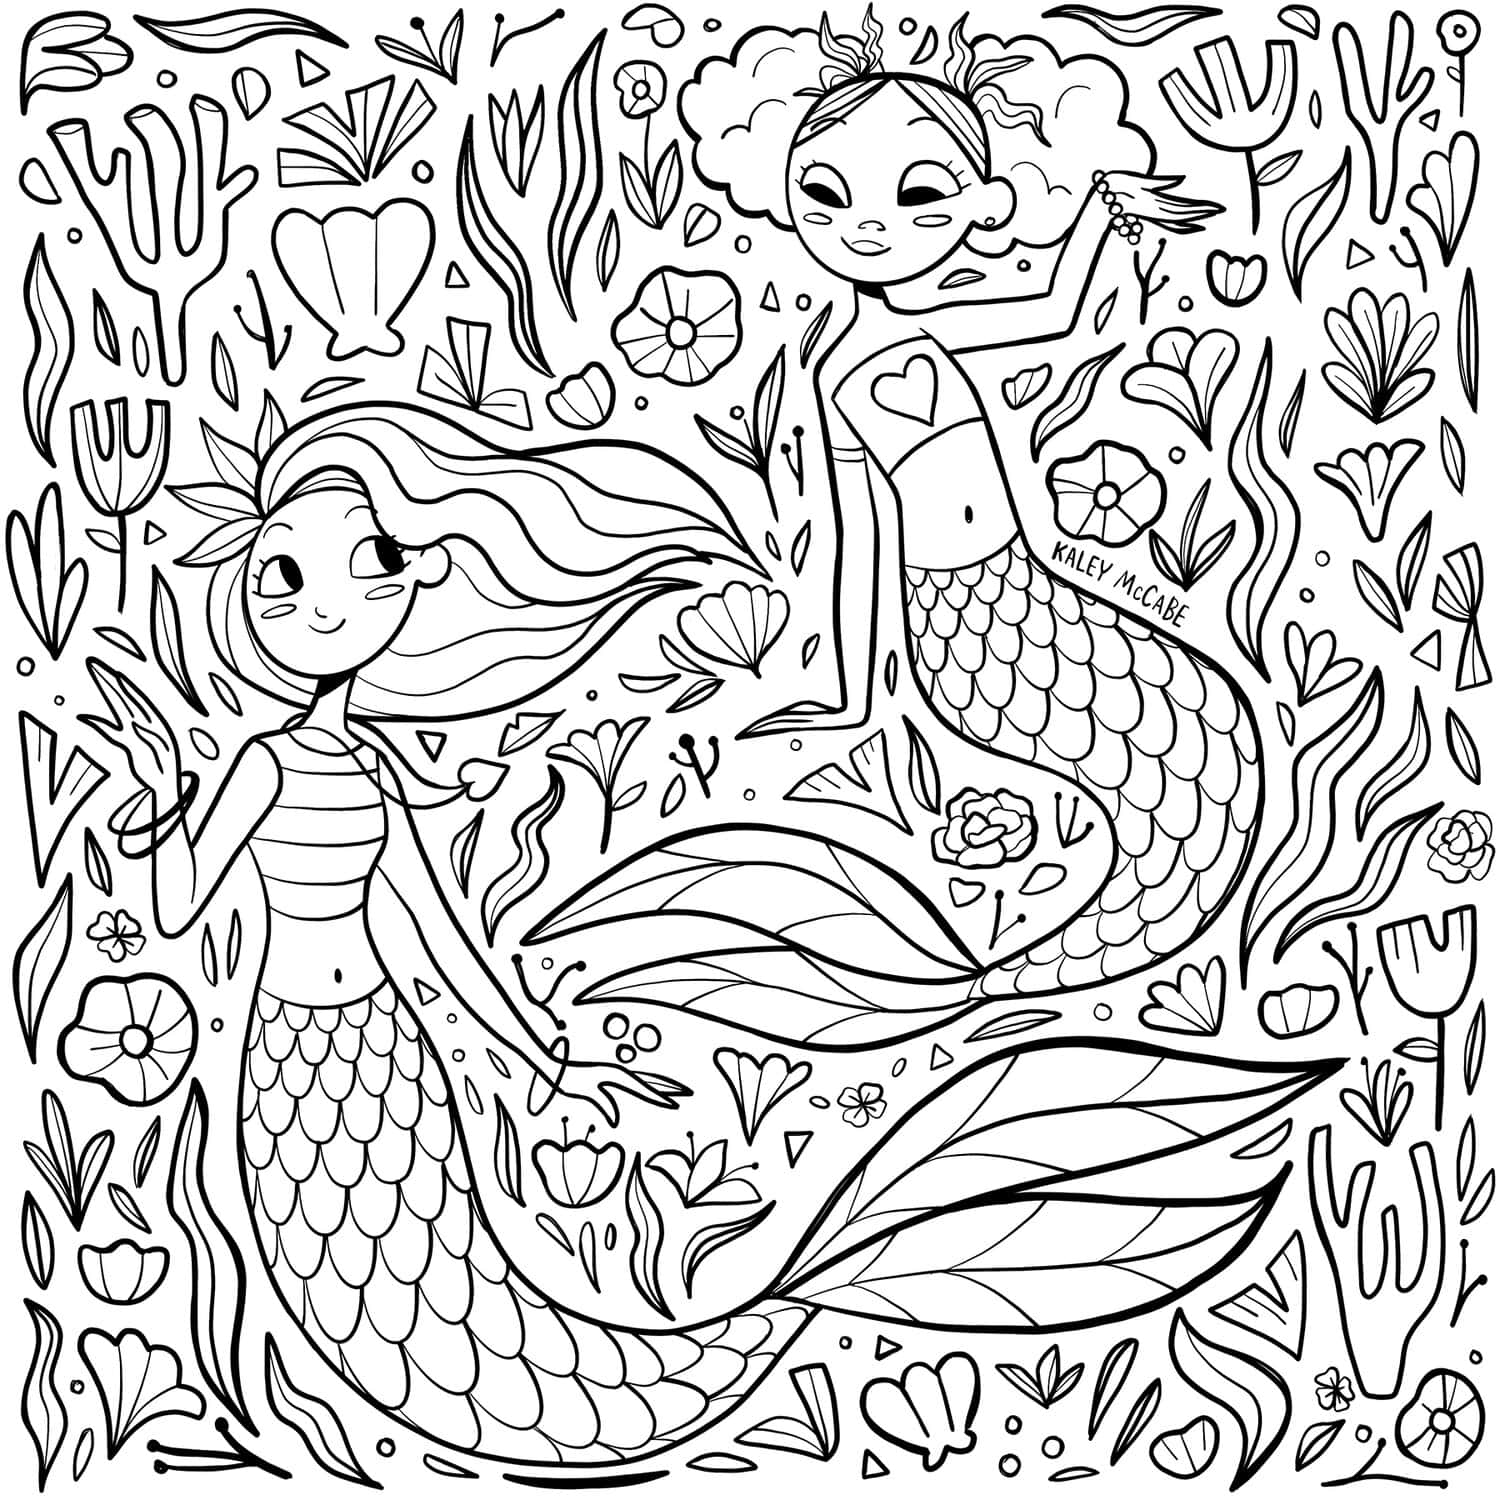 Enjoy coloring this beautiful mermaid picture